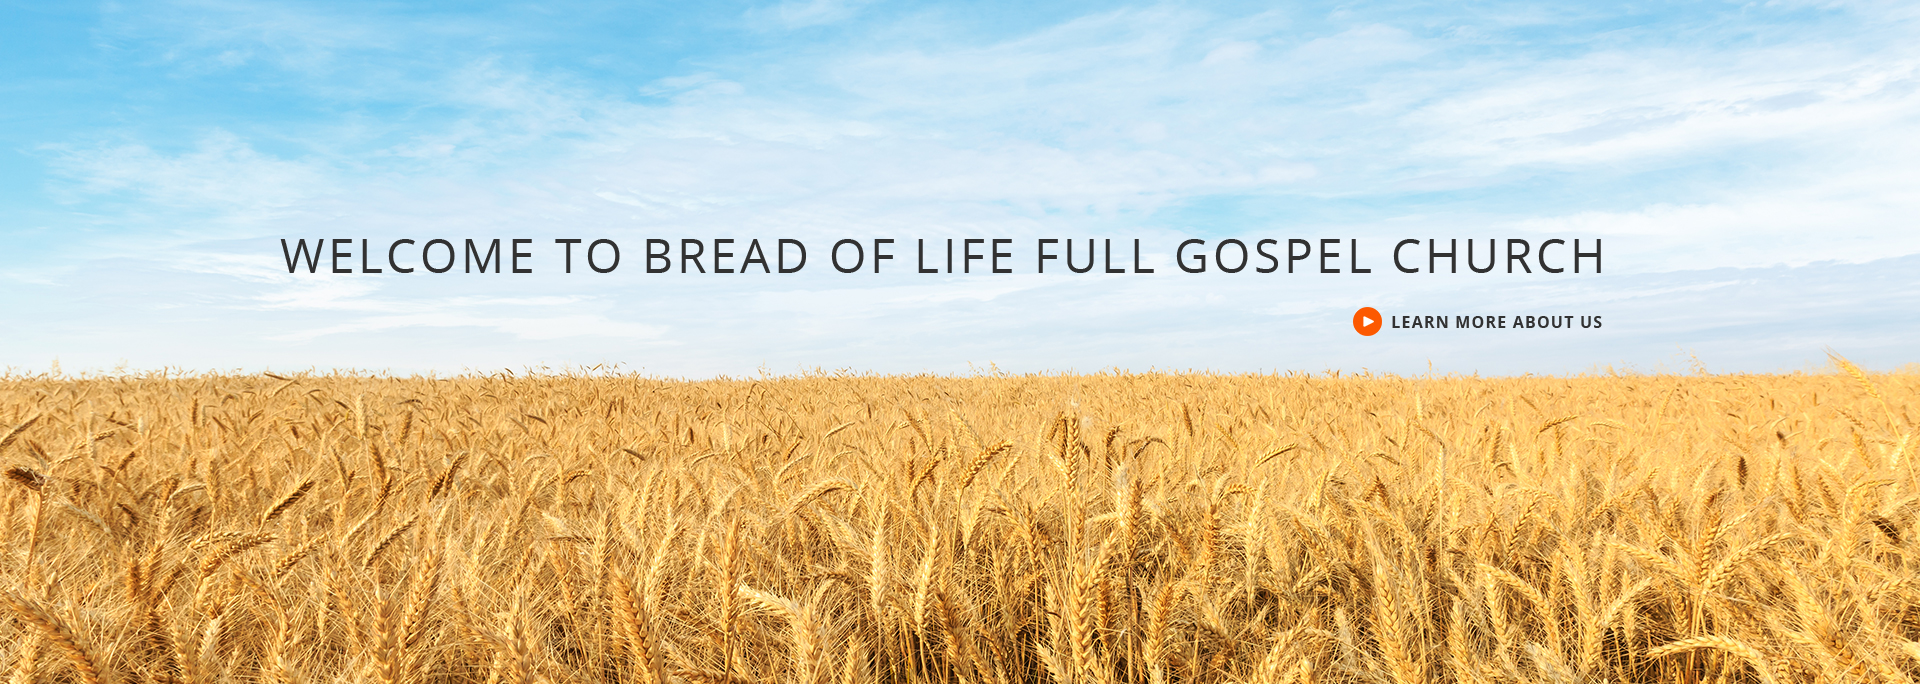 Welcome To Bread of Life Full Gospel Church